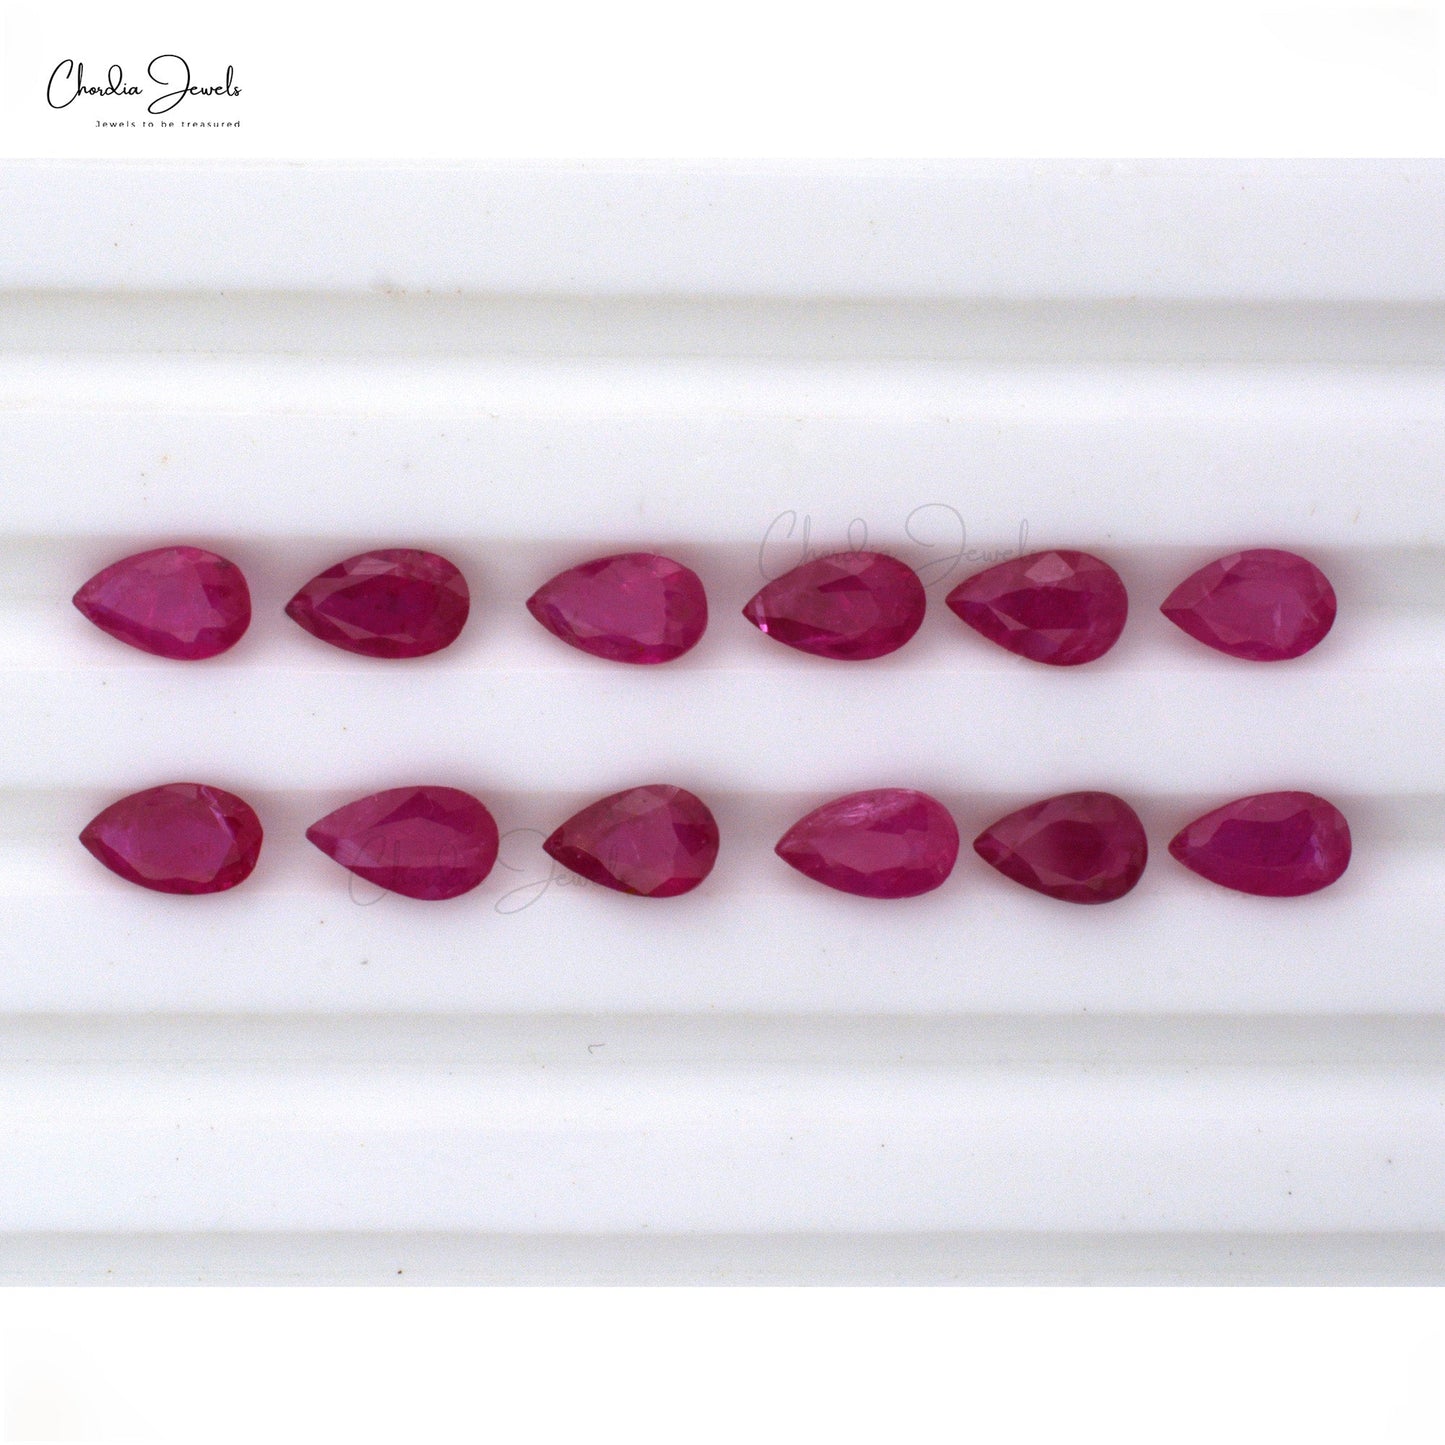 High Quality Natural Ruby Faceted Pear Cut 4x3mm, 1 Piece